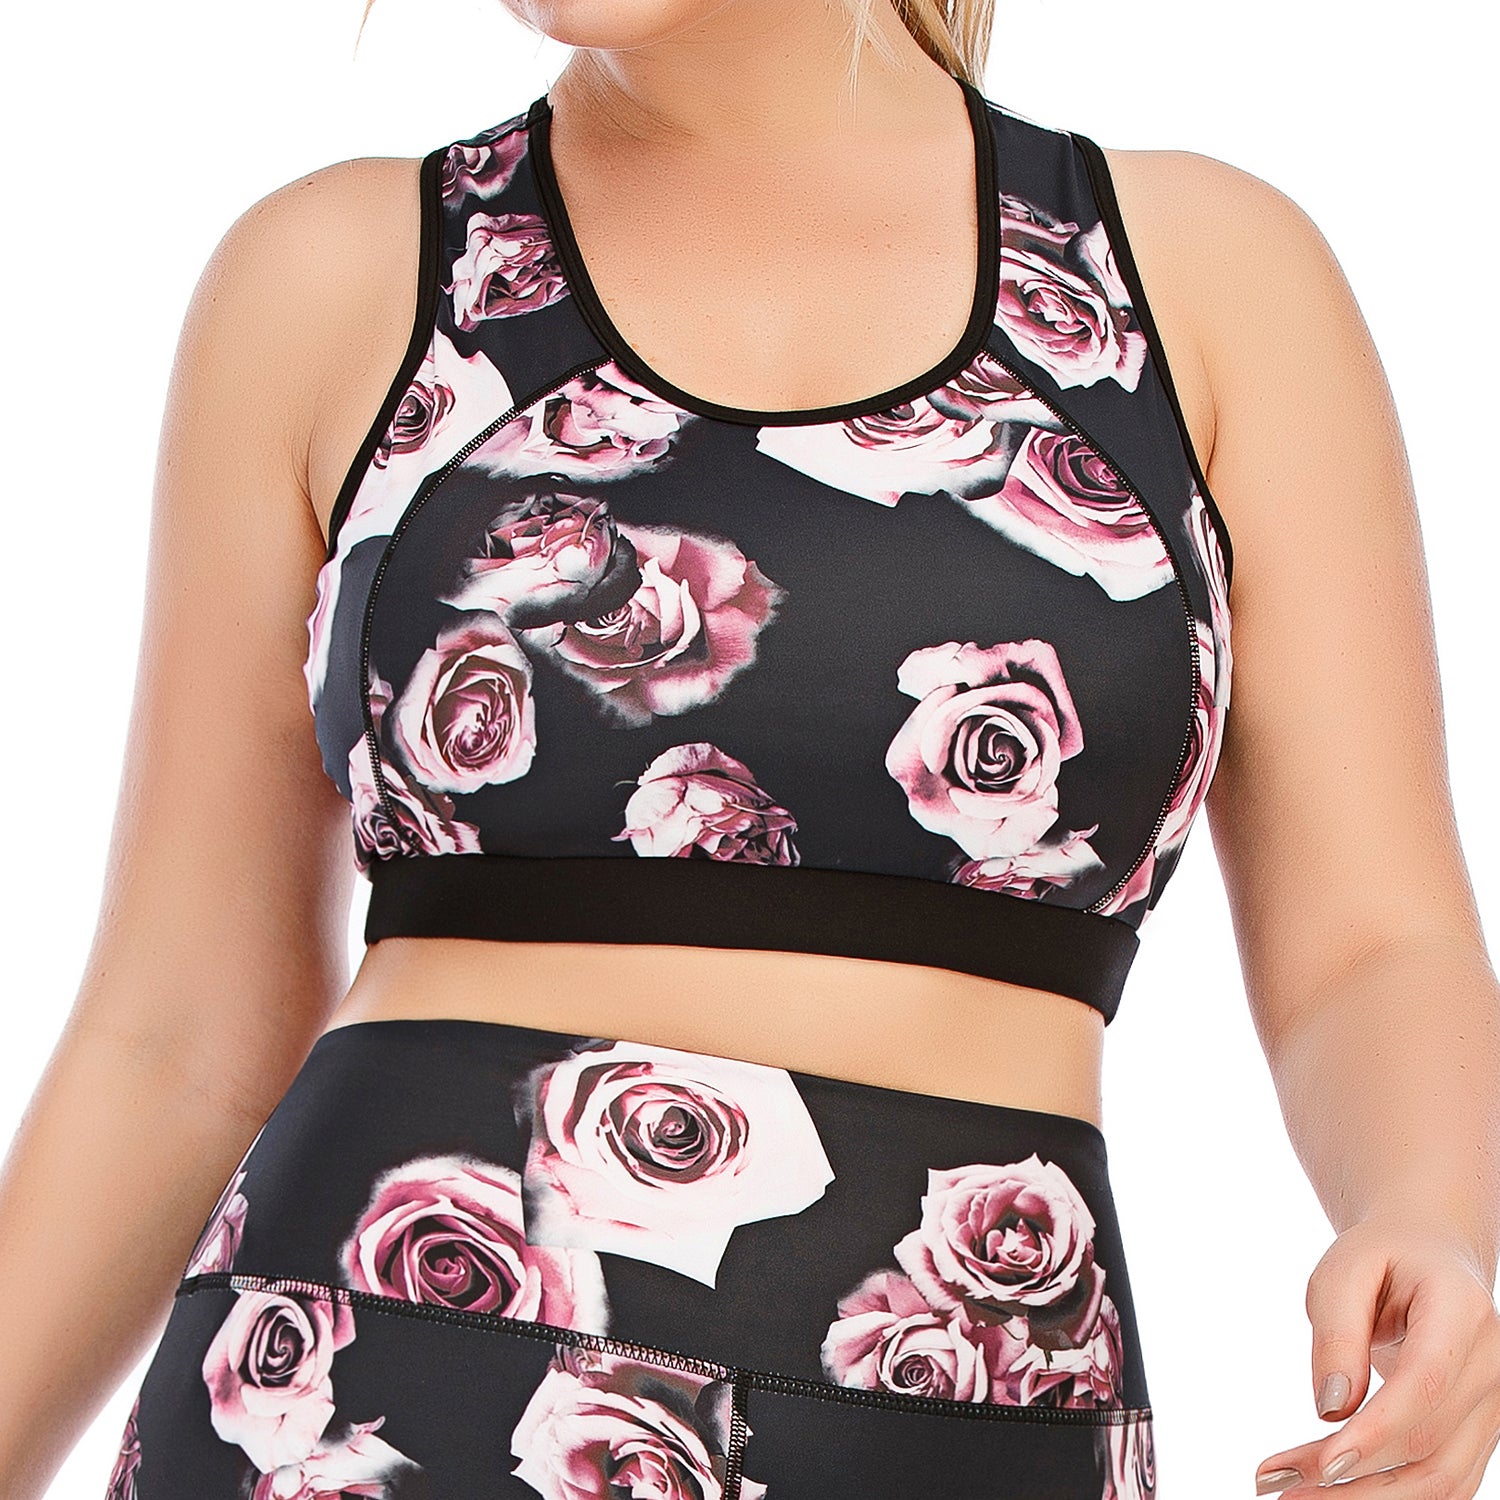 Yoga Tops Rose Printed for Women Plus Size